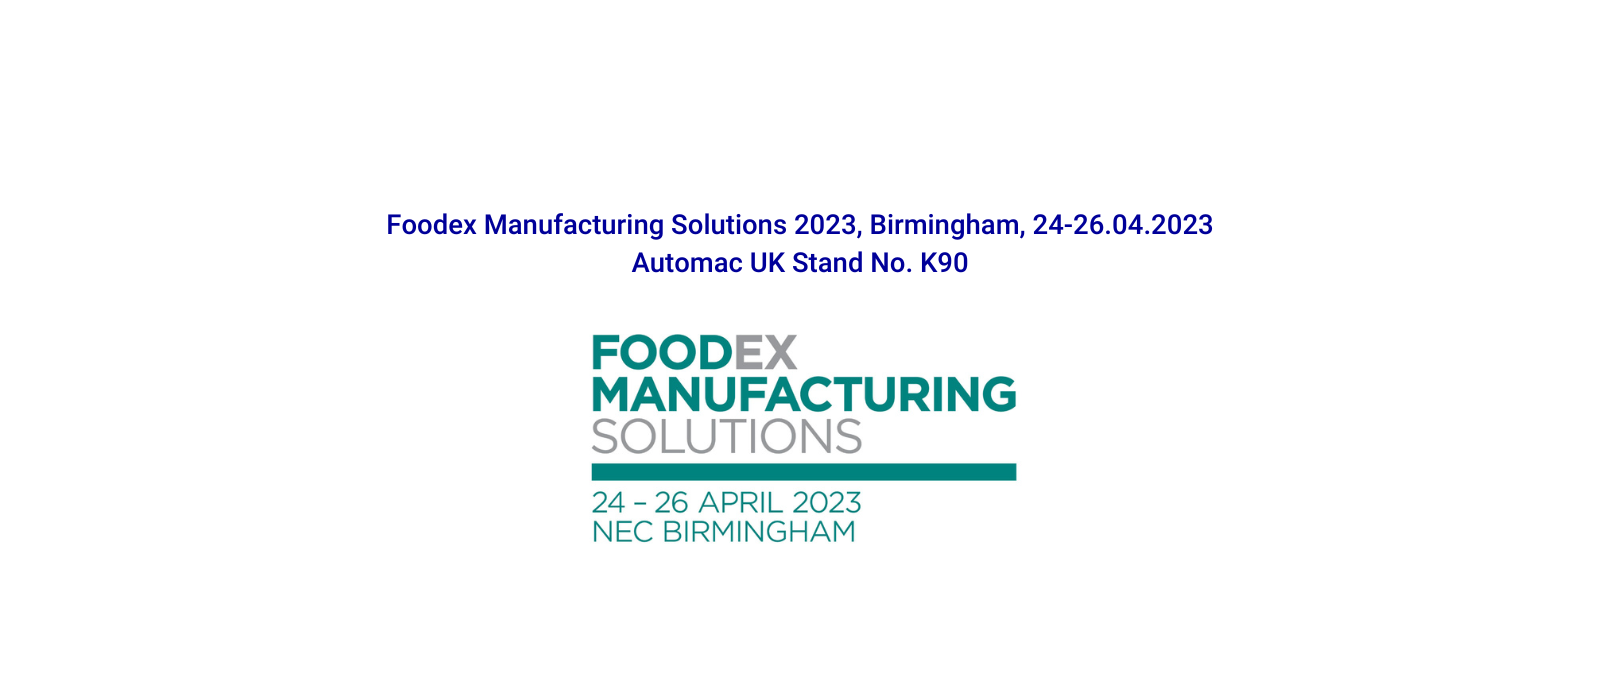 Automac UK a Foodex Manufacturing Solutions 2023